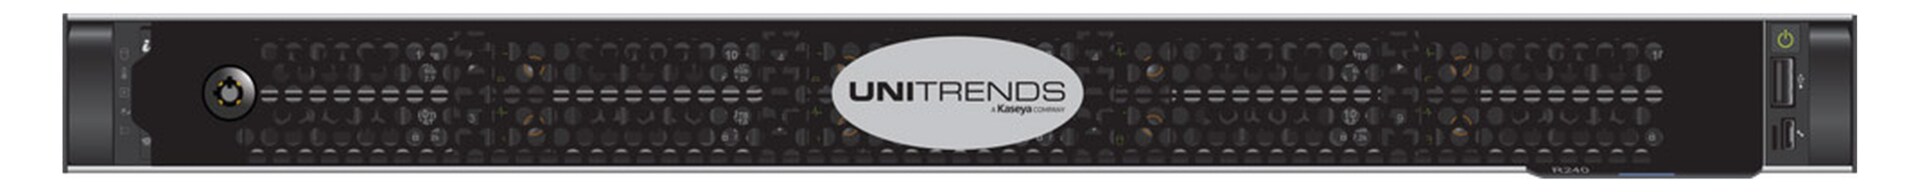 Unitrends Recovery Series 9004 1U Short Backup Appliance with Subscription